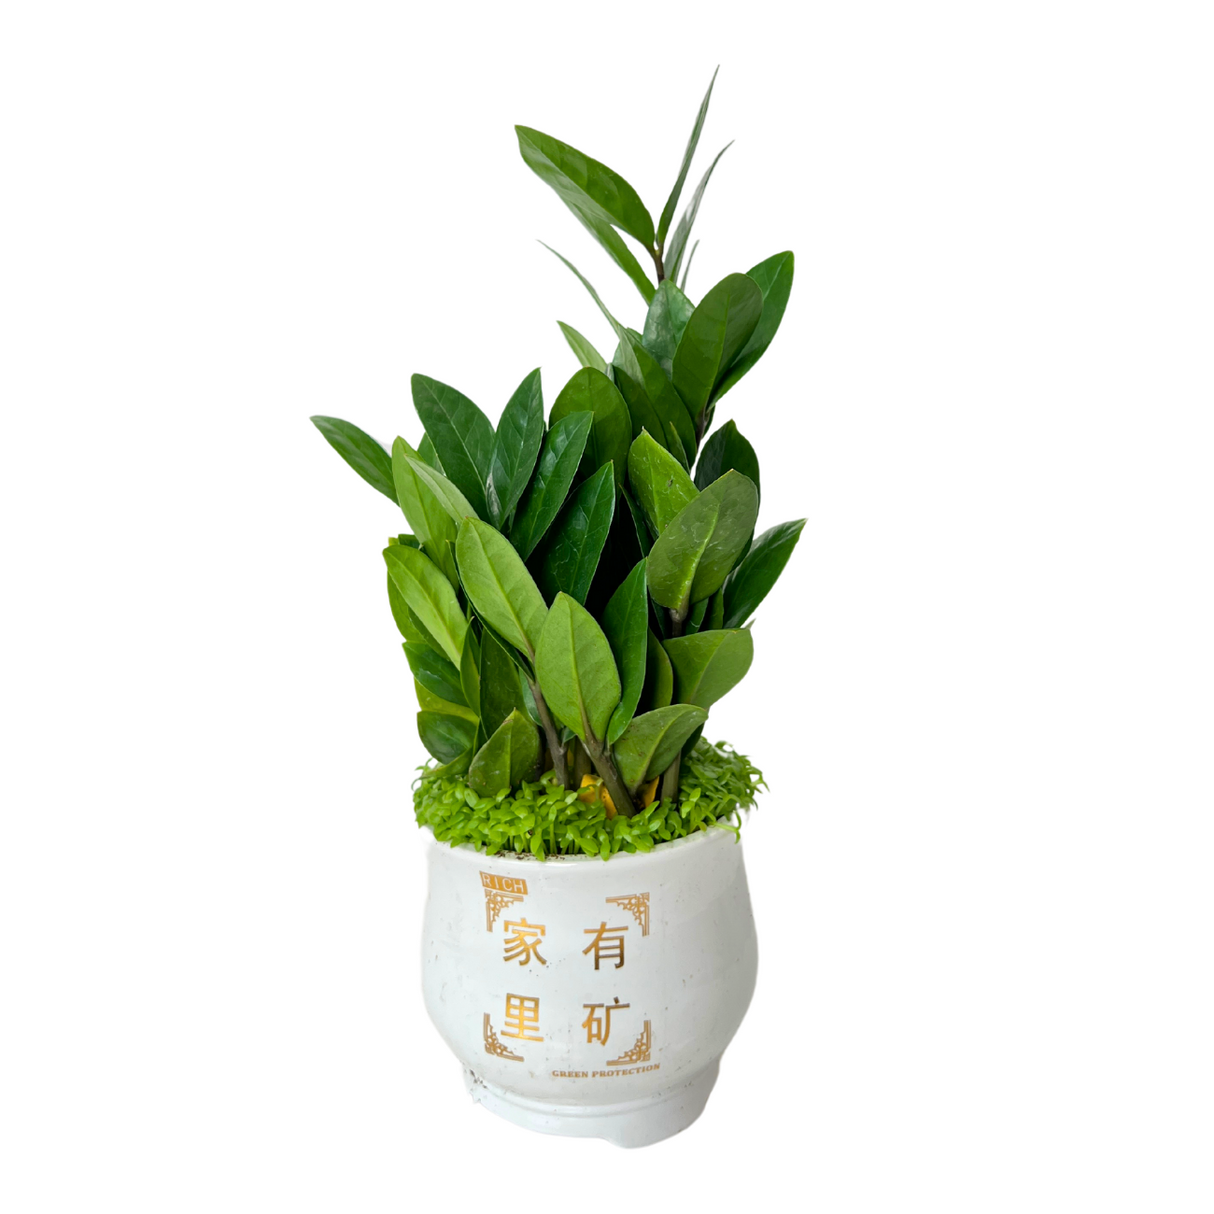 Zamioculcas Plant with Dragon Fruit Seed